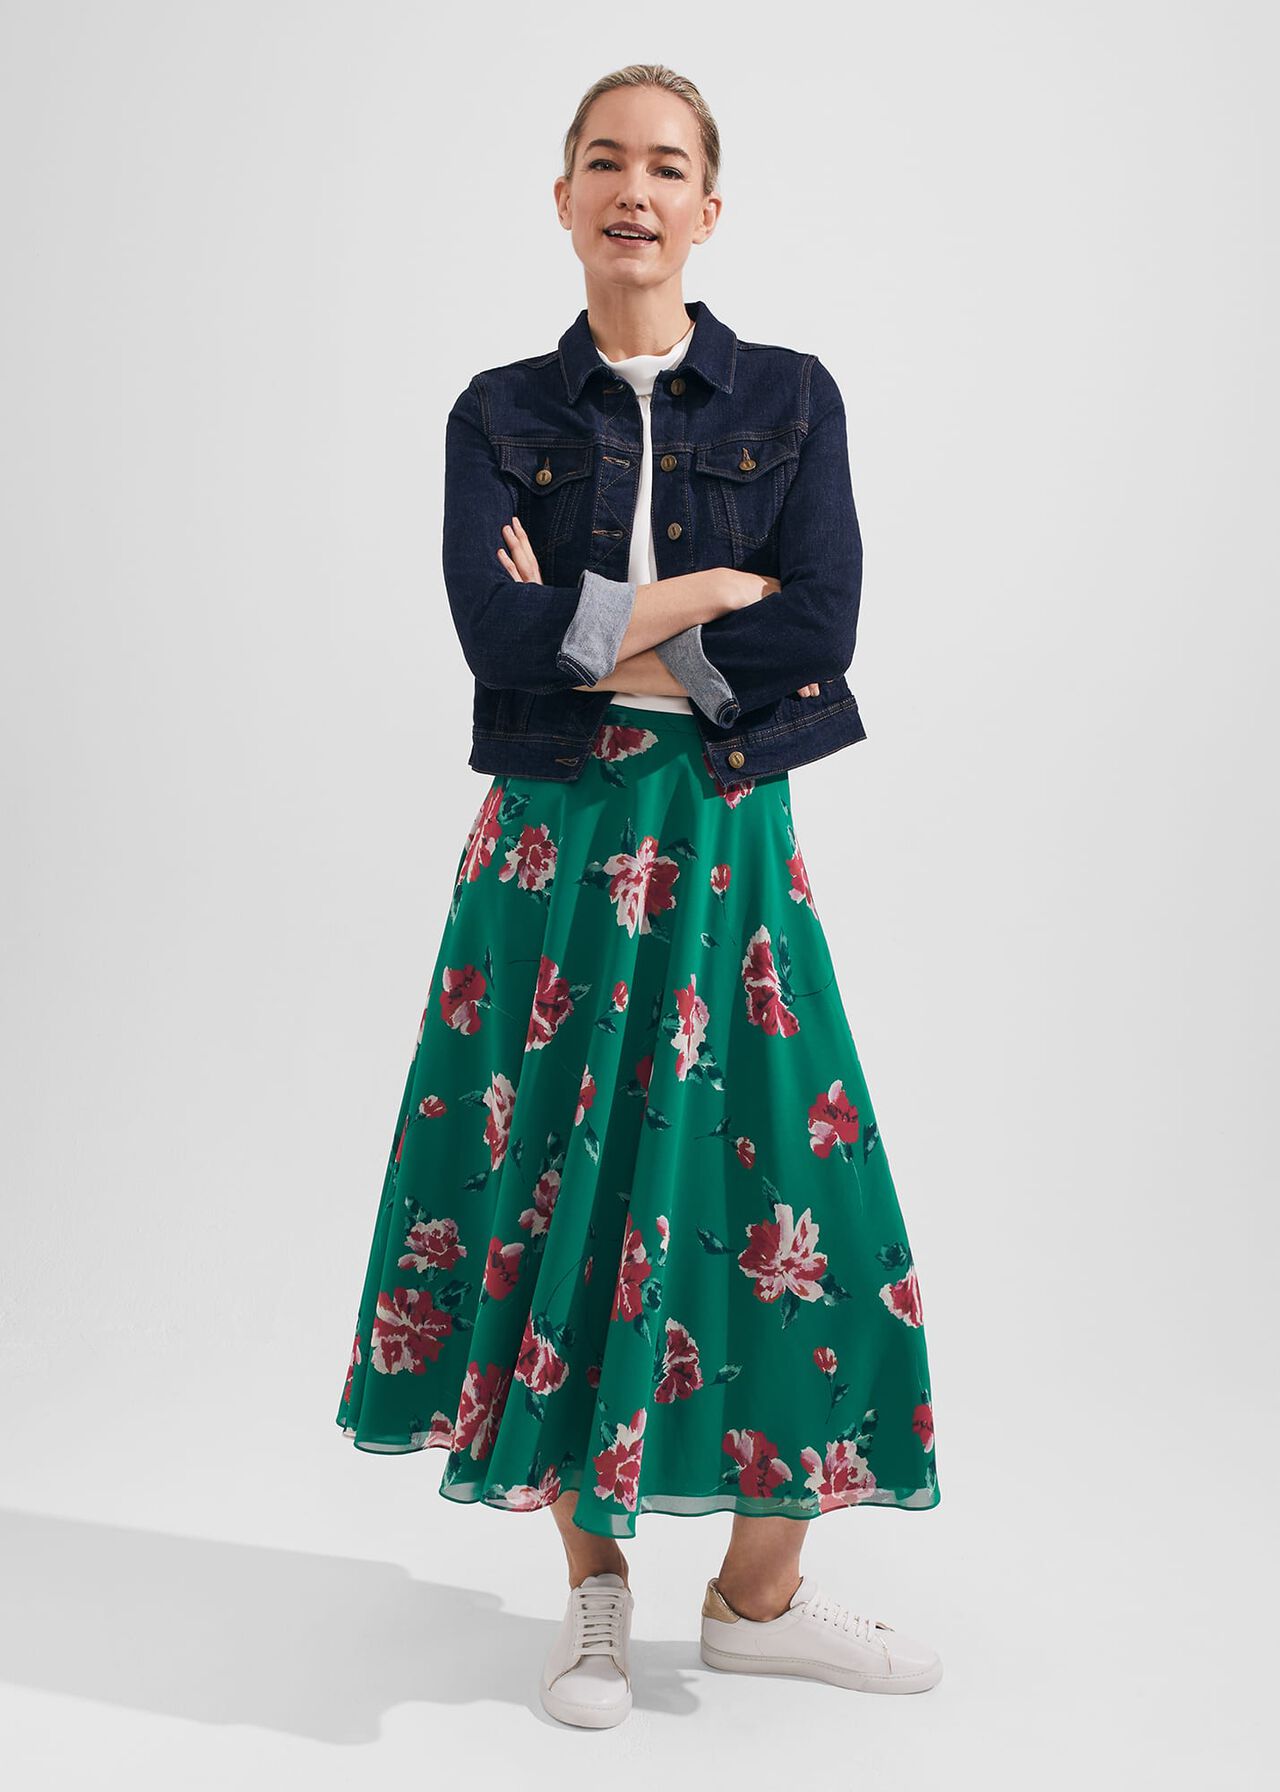 Carly Floral A Line Skirt, Green Multi, hi-res